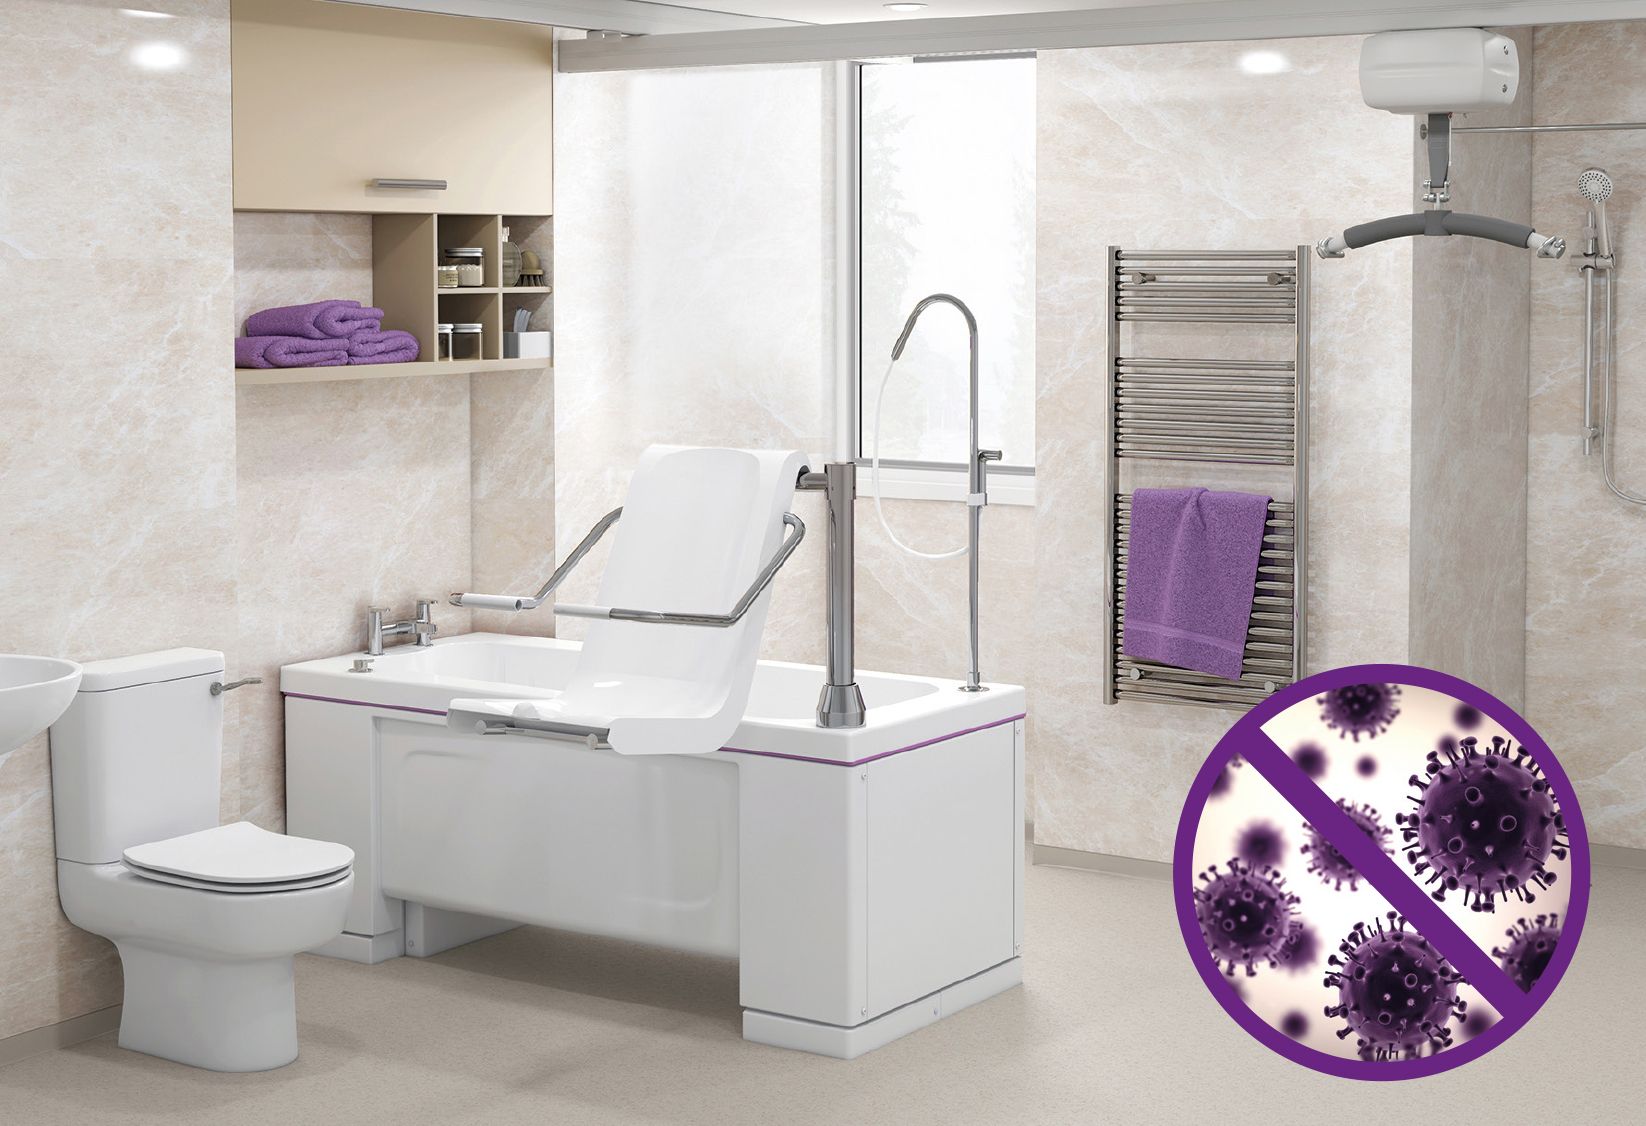 Infection control bathing – Gainsborough Specialist Bathrooms to pioneer at Care Show 2021